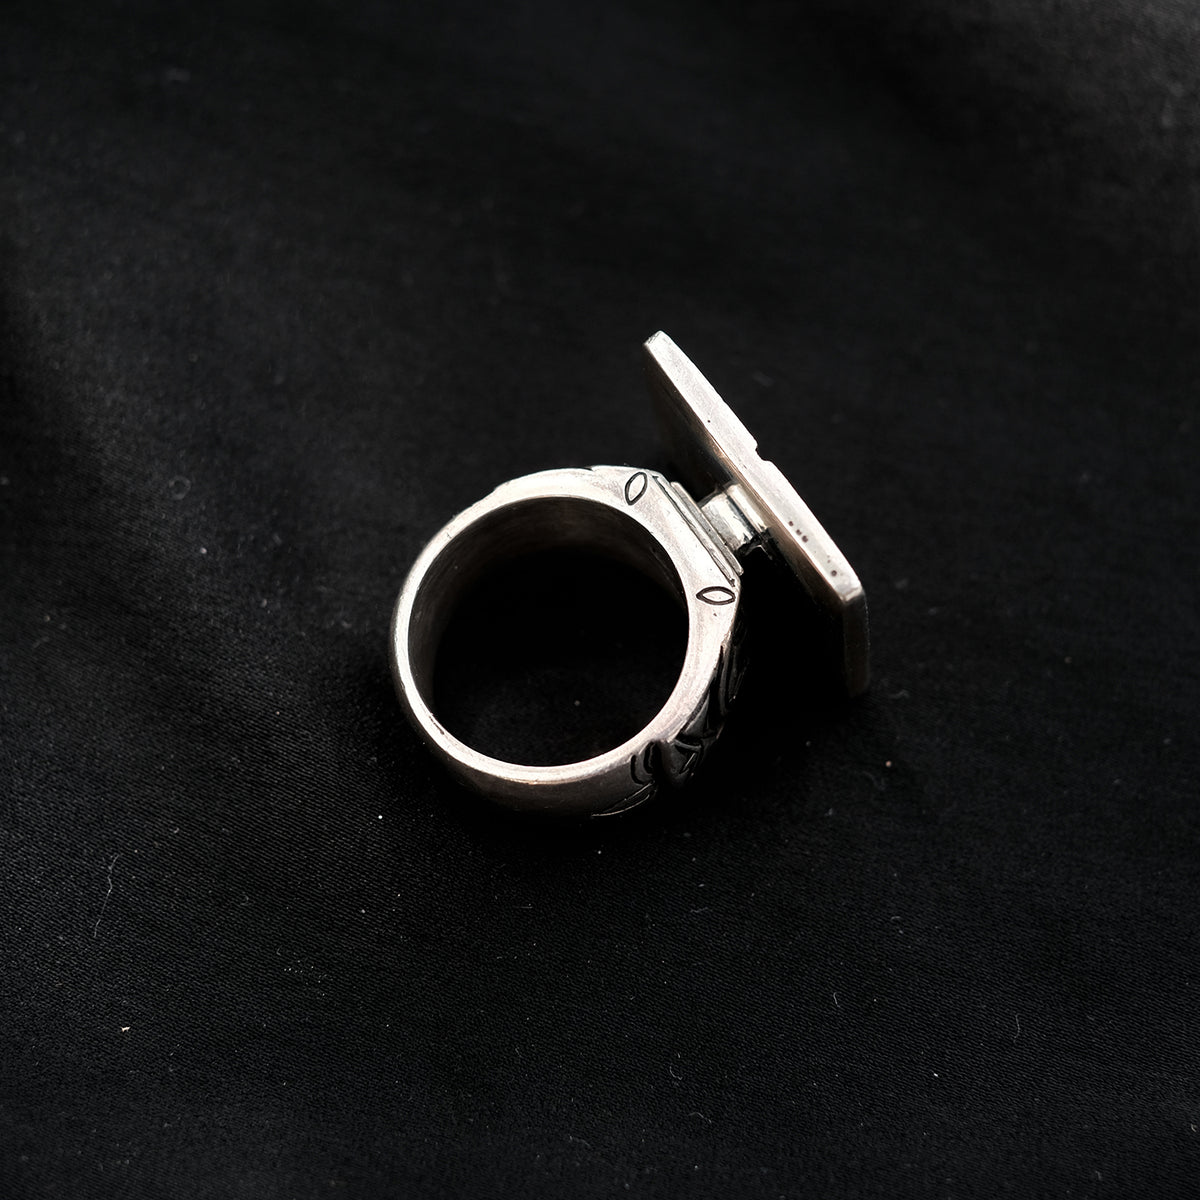 Anillo de plata de los fulani ( o Peul ), pueblo nomada del Sahel.  Tamaños 14/15/17 Lula Hand made silver ring from the Peul people ( or Fulani ), nomadic ethnic group that lives in the Sahel and West Africa.